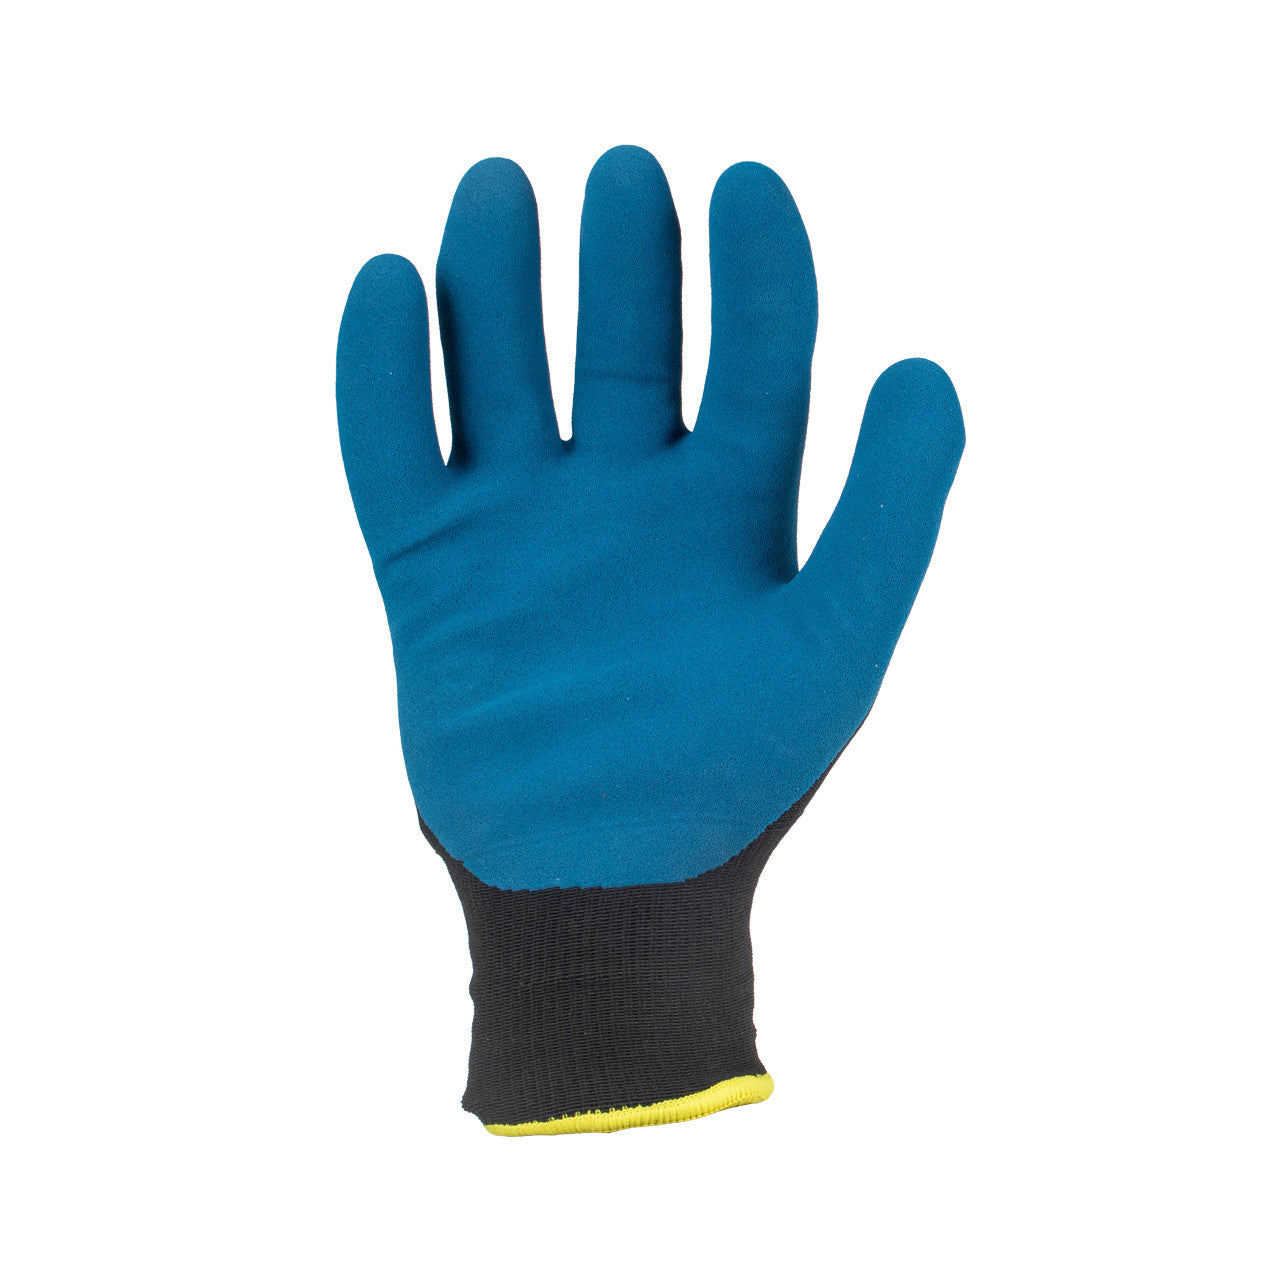 Ironclad Insulated A2 Latex Glove Black/Blue-eSafety Supplies, Inc